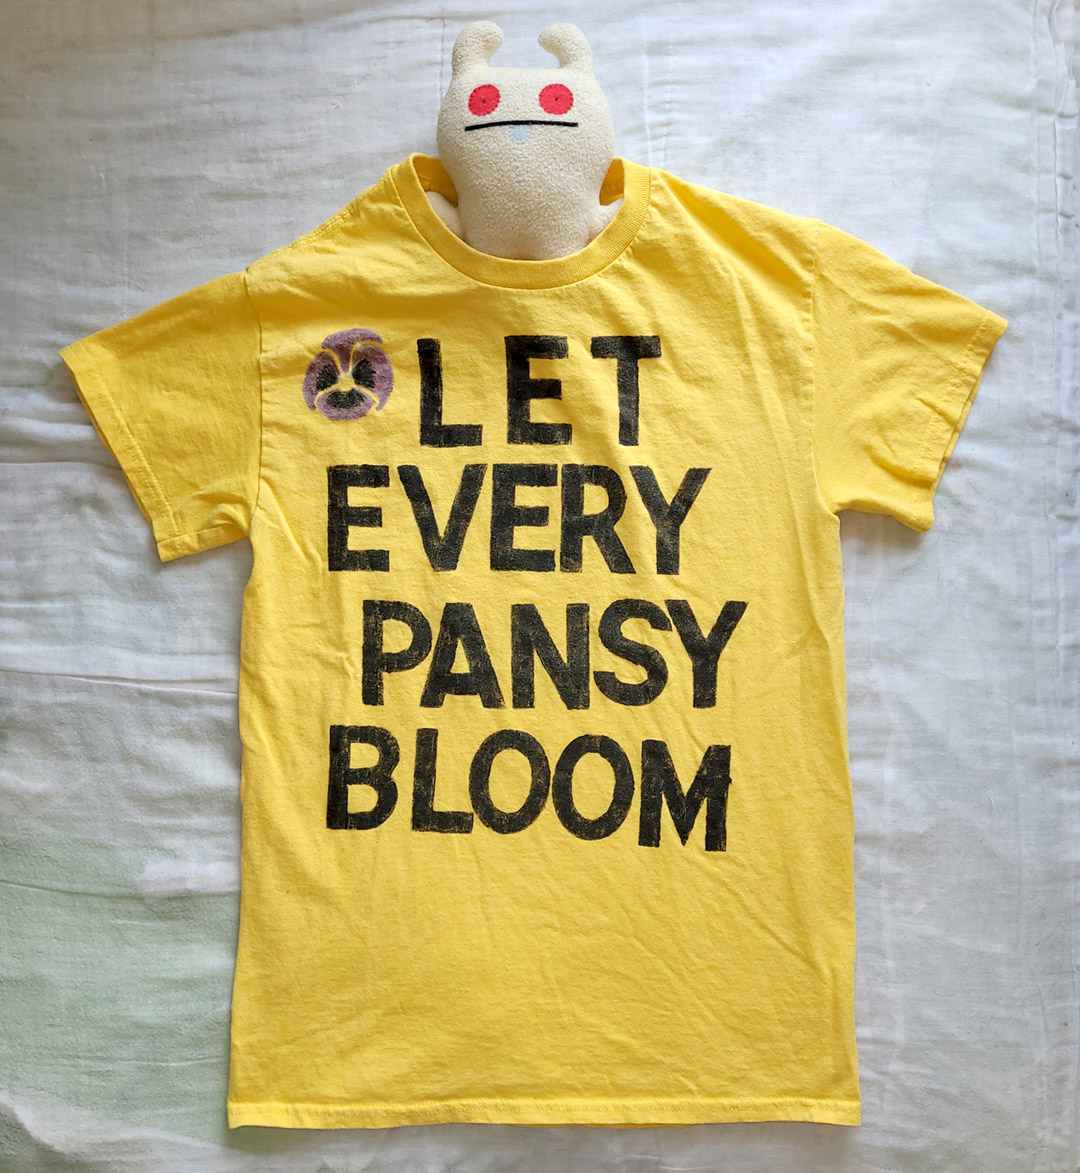 A yellow shirt with black text and a small purple pansy, reading Let Every Pansy Bloom